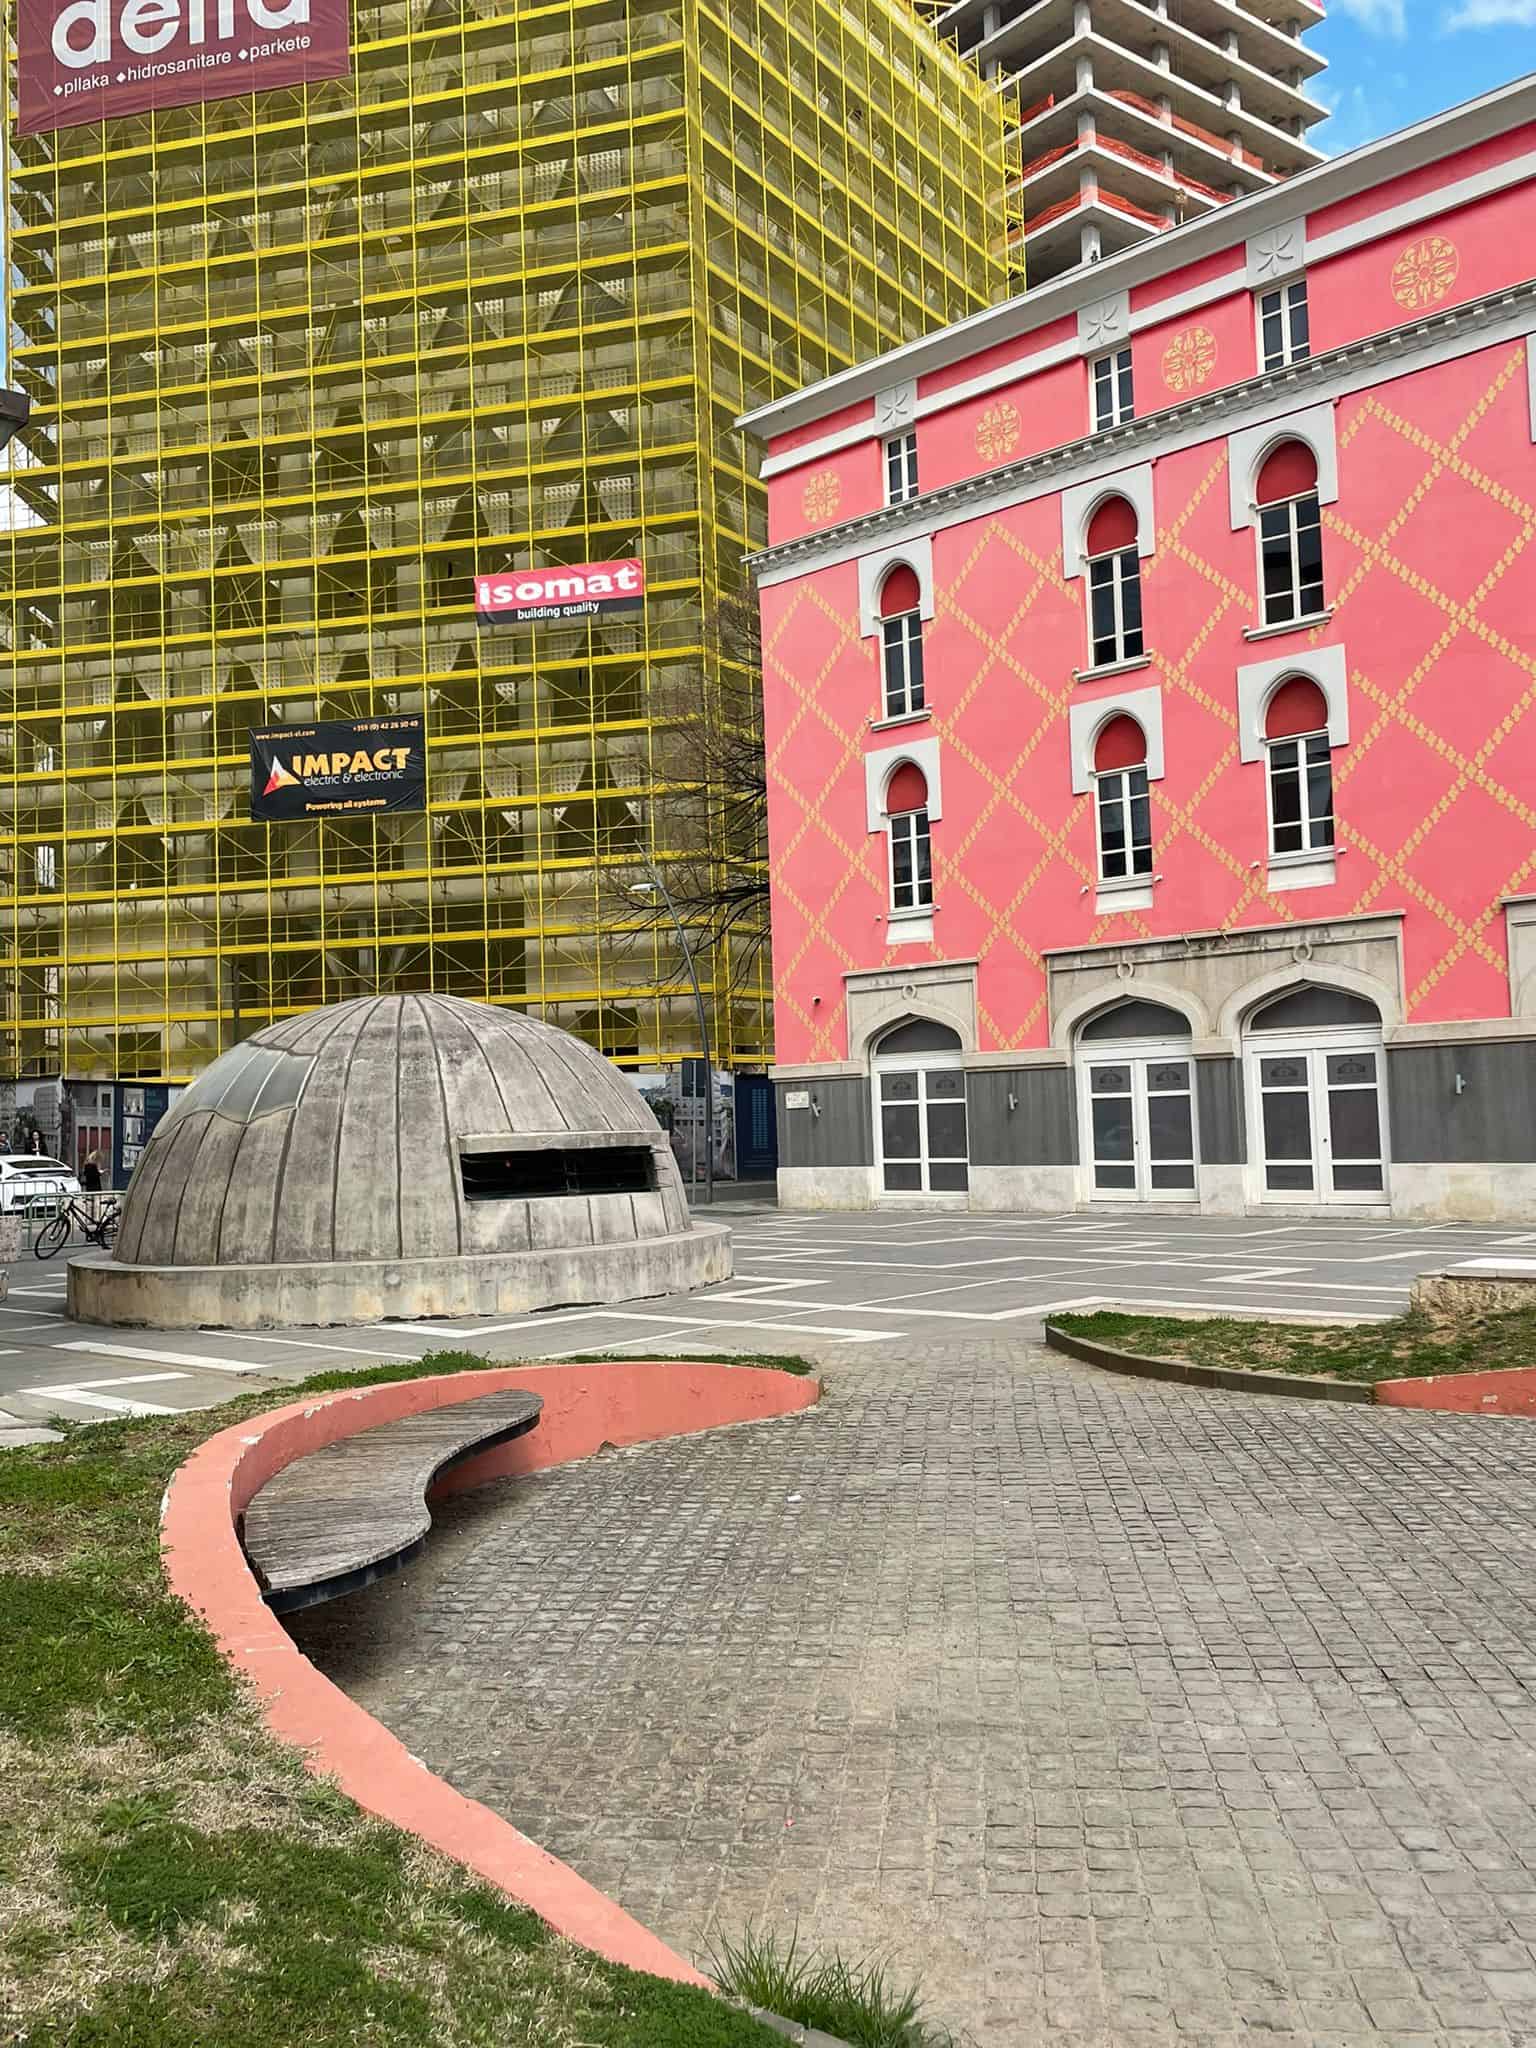 One of Albania's infamous bunkers standing in front of a pink building in Tirana, Albania